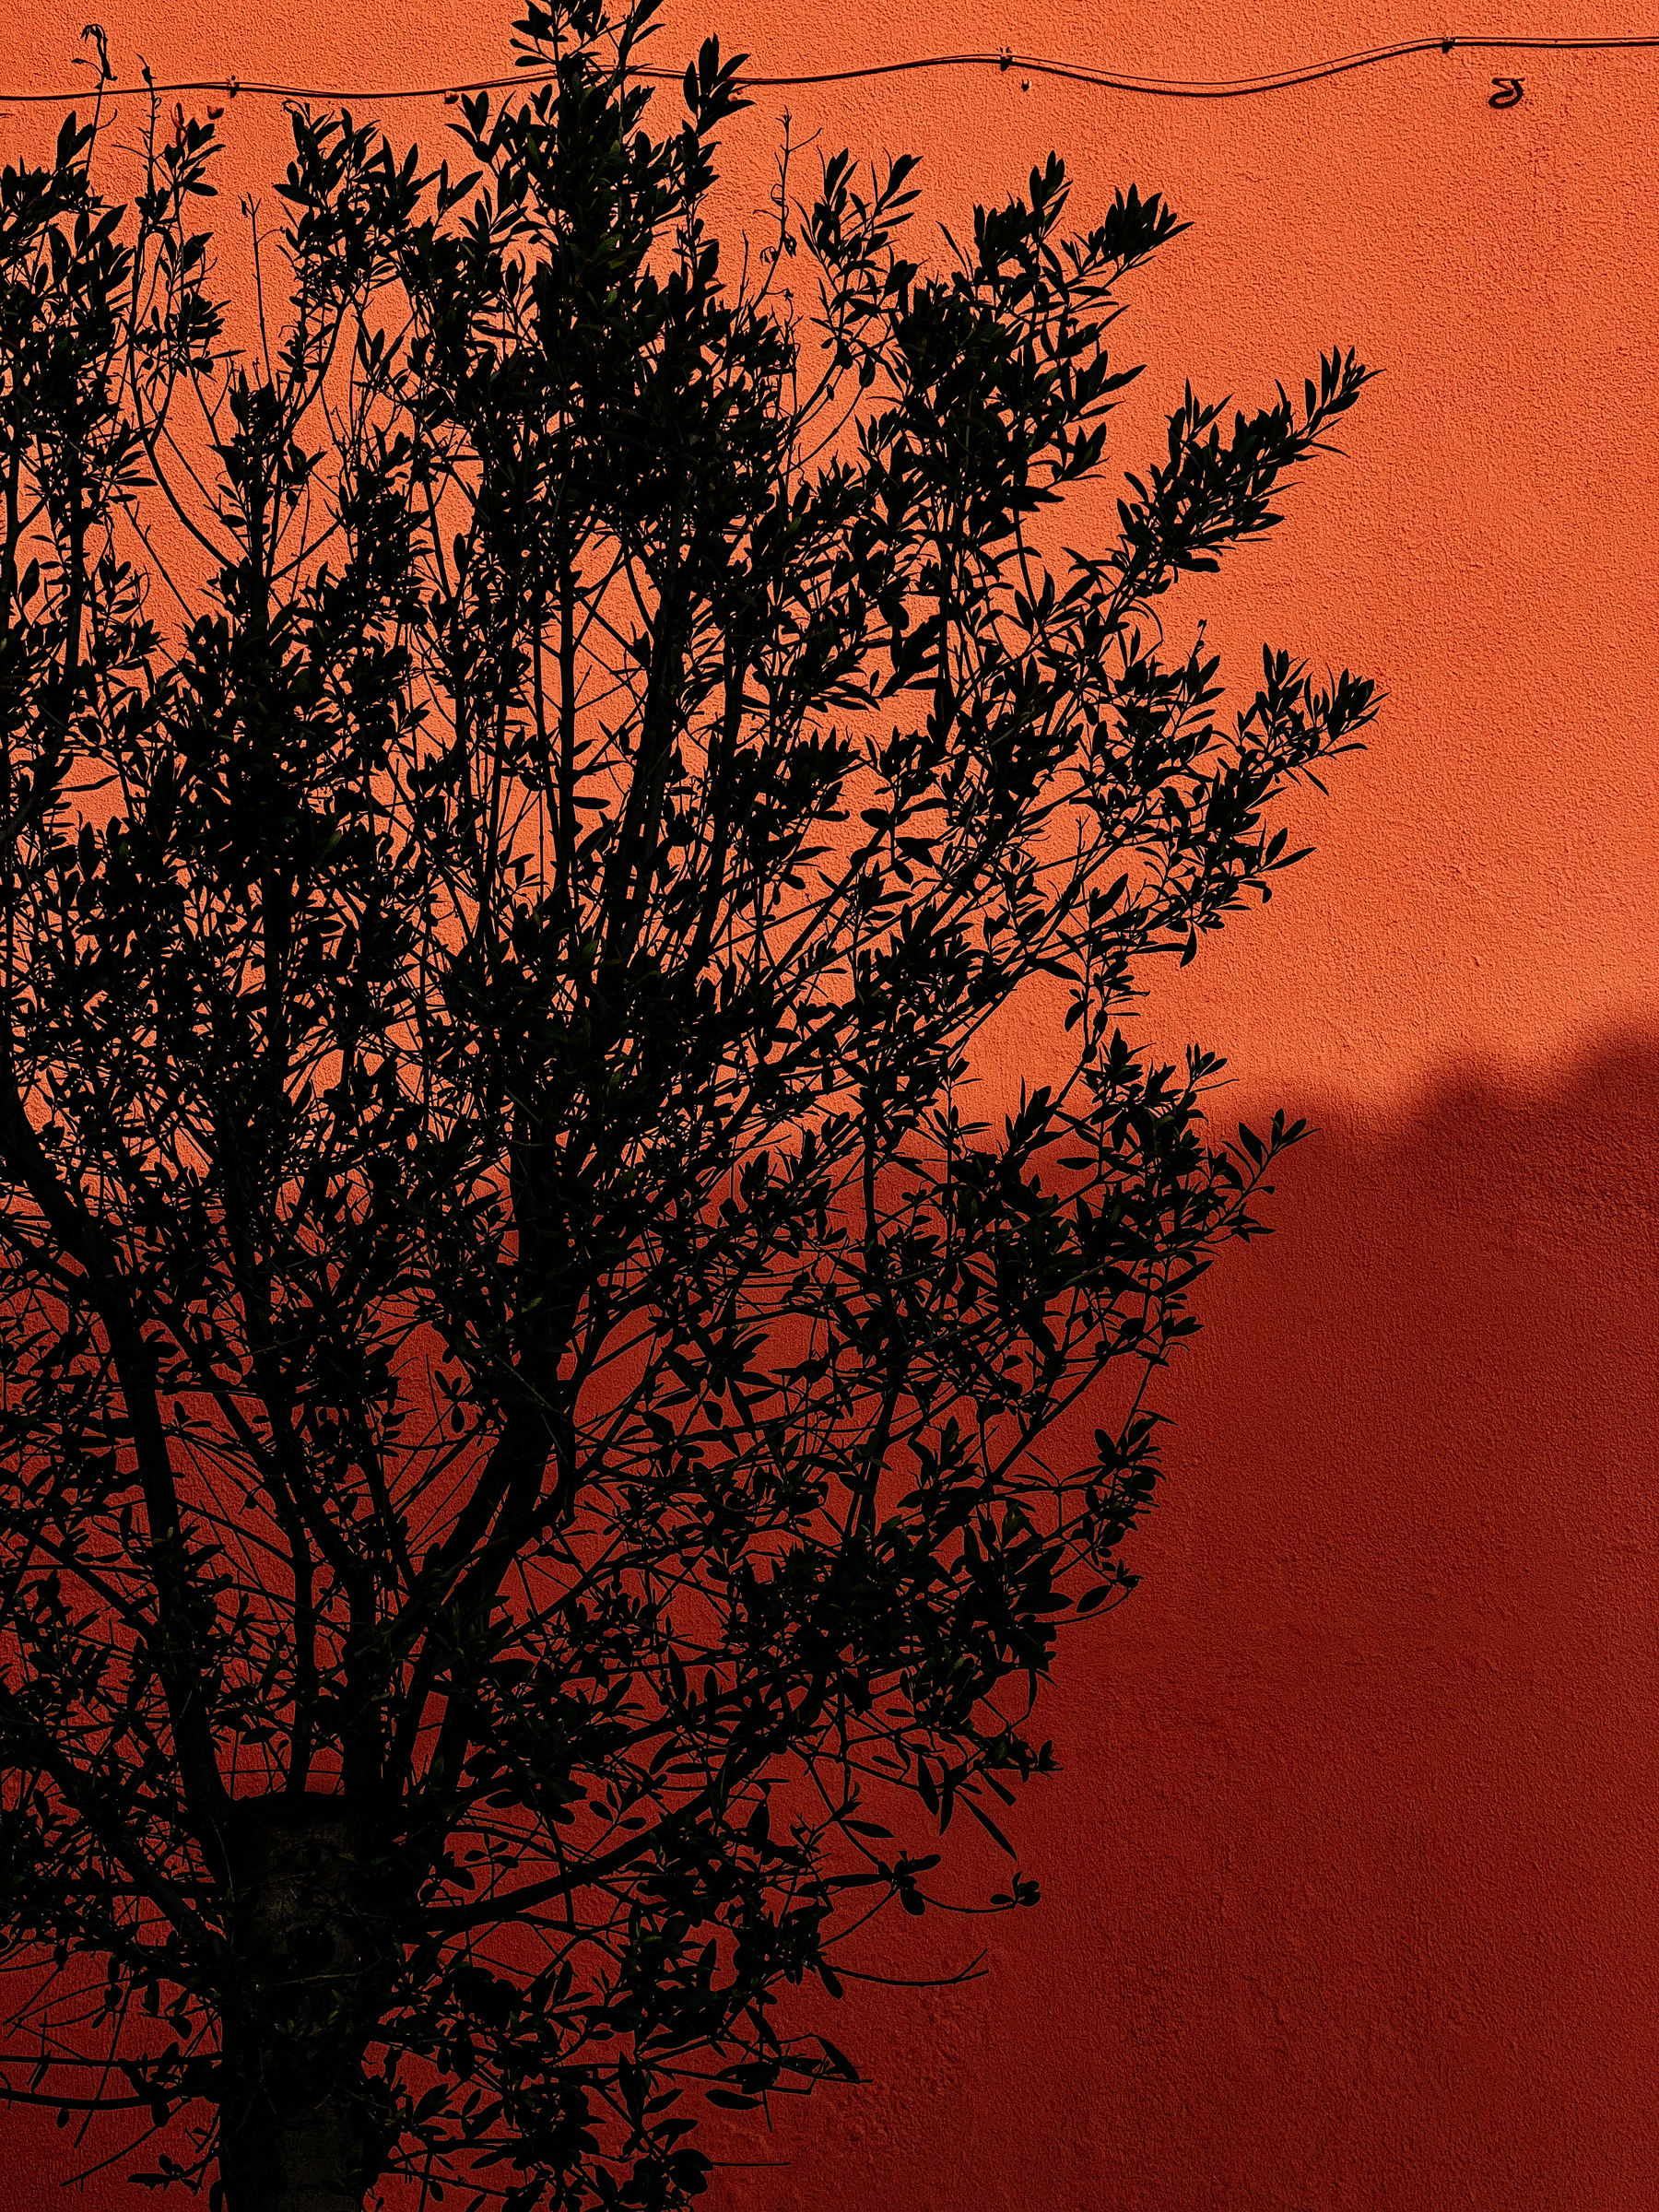 a small tree silhouette with a redish wall behind it